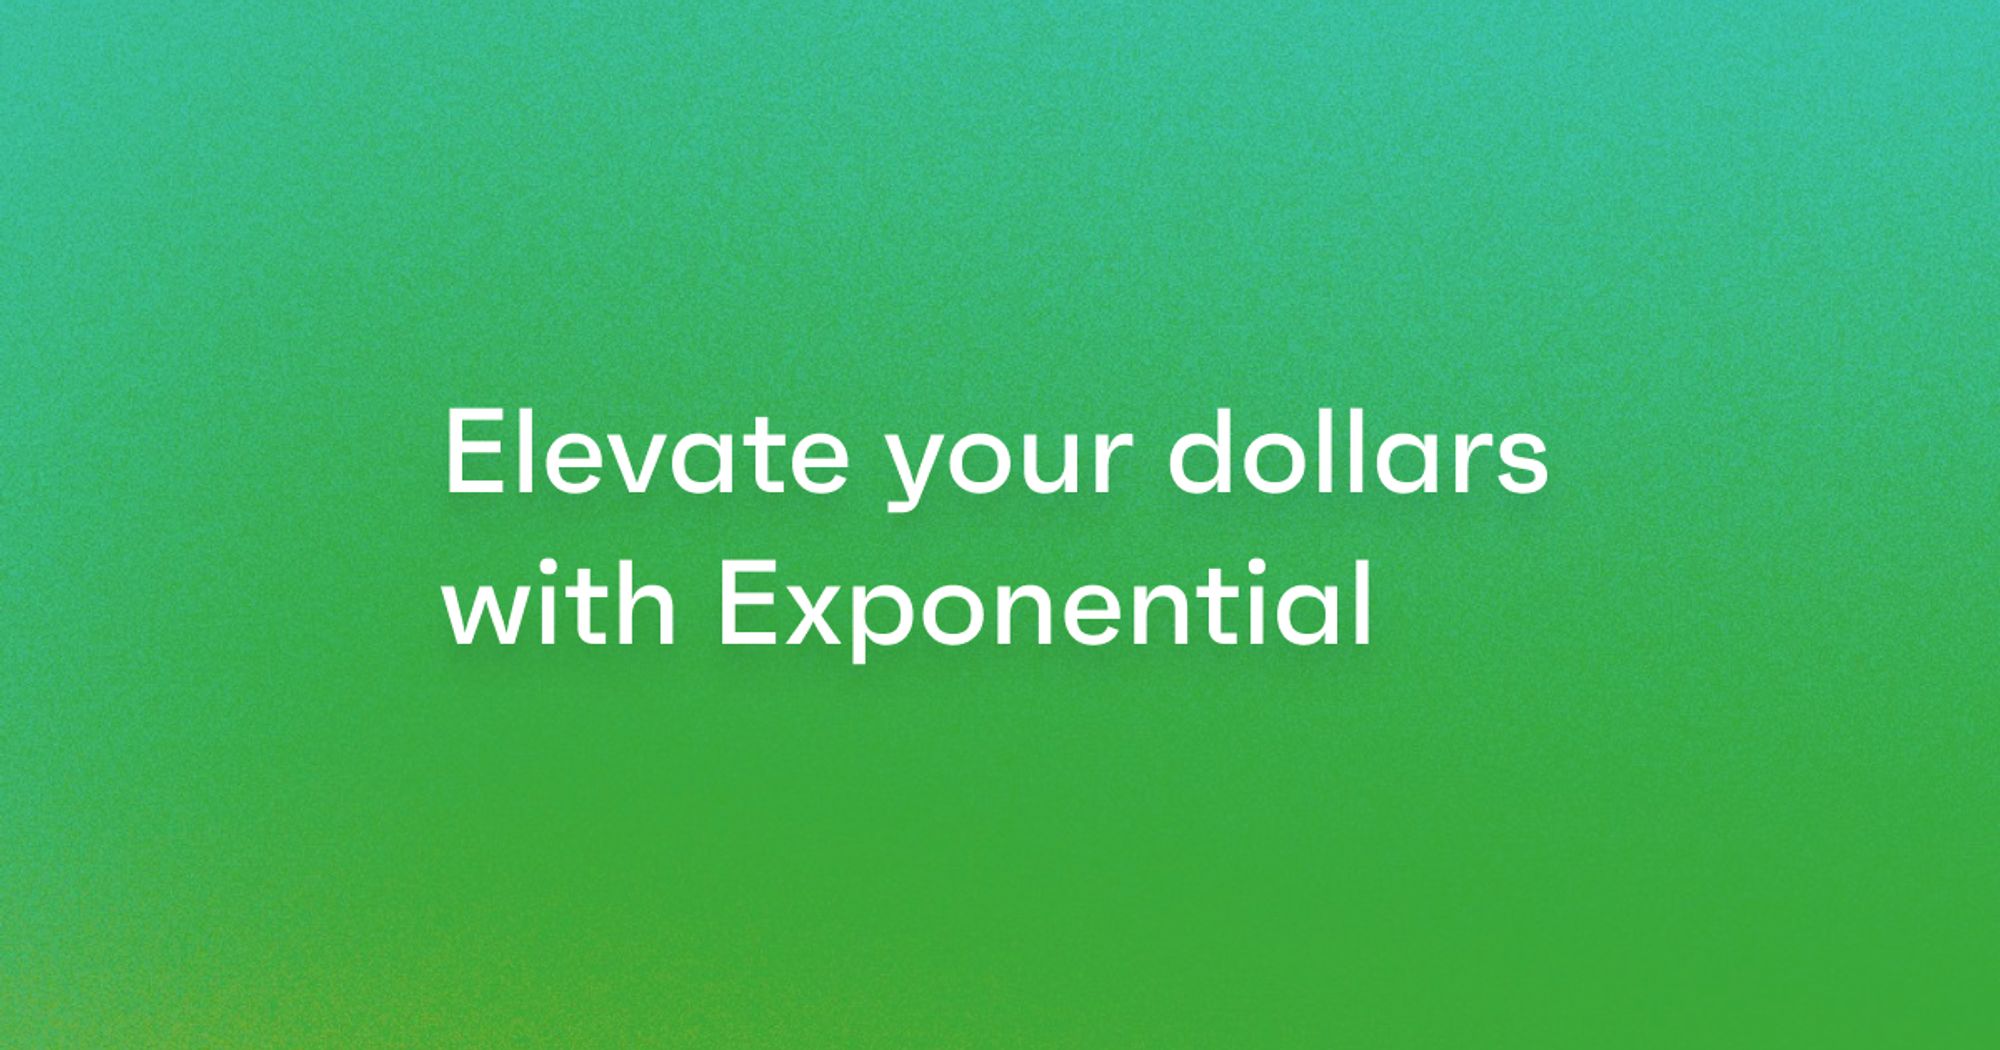 Elevate your dollars with Exponential blog cover image